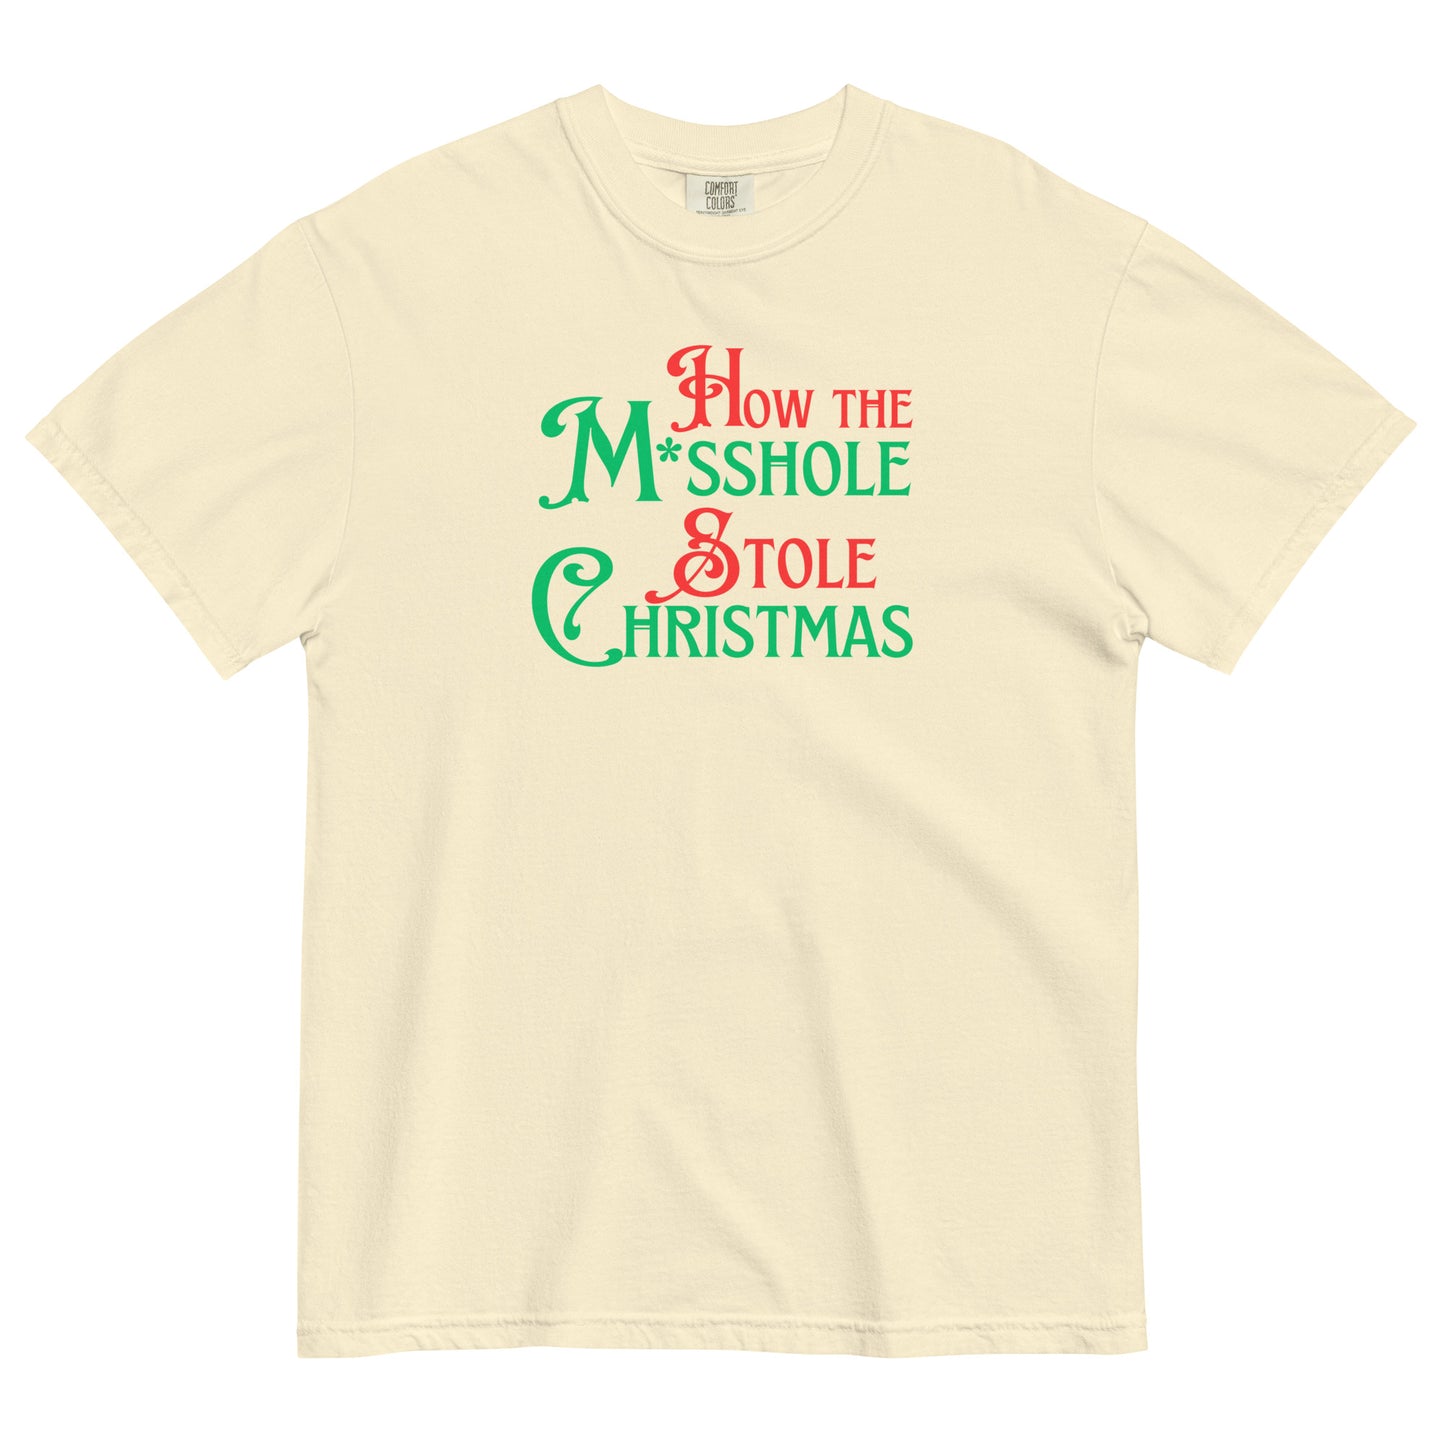 How the M*sshole Stole Christmas T-Shirt